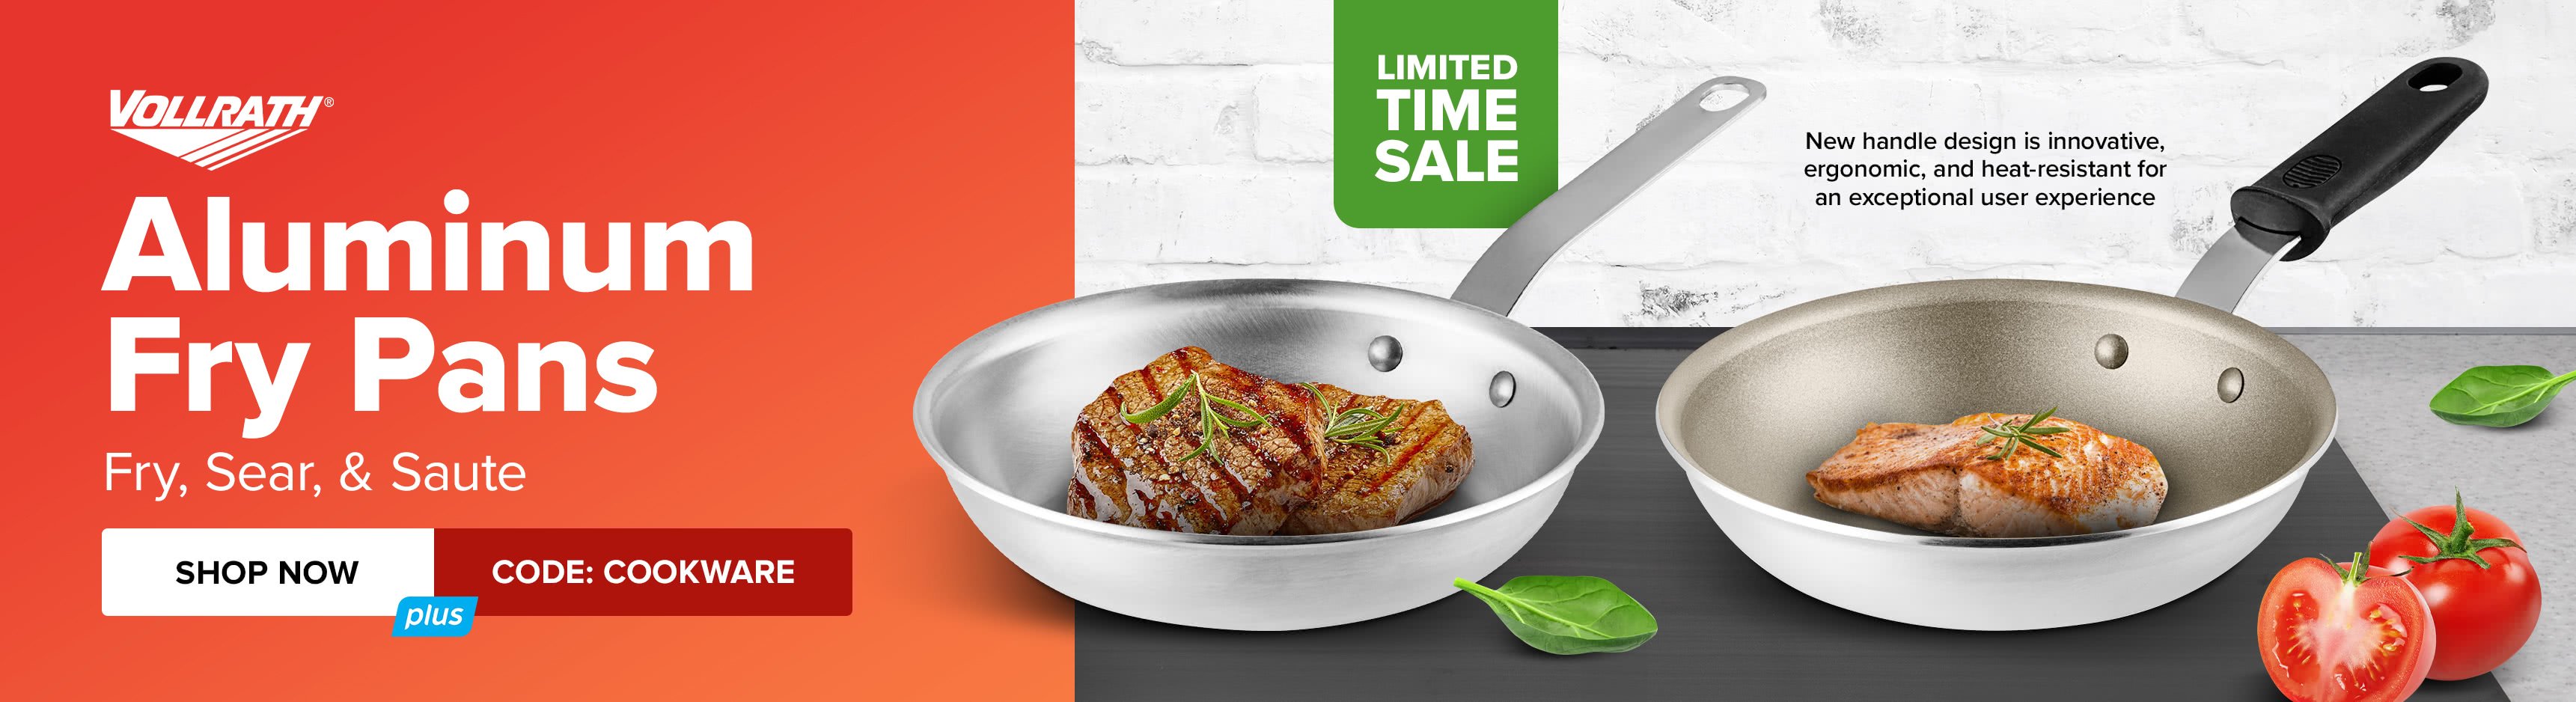 Vollrath Aluminum Fry Pans On Sale For a Limited Time. Save 10% with Code COOKWARE.